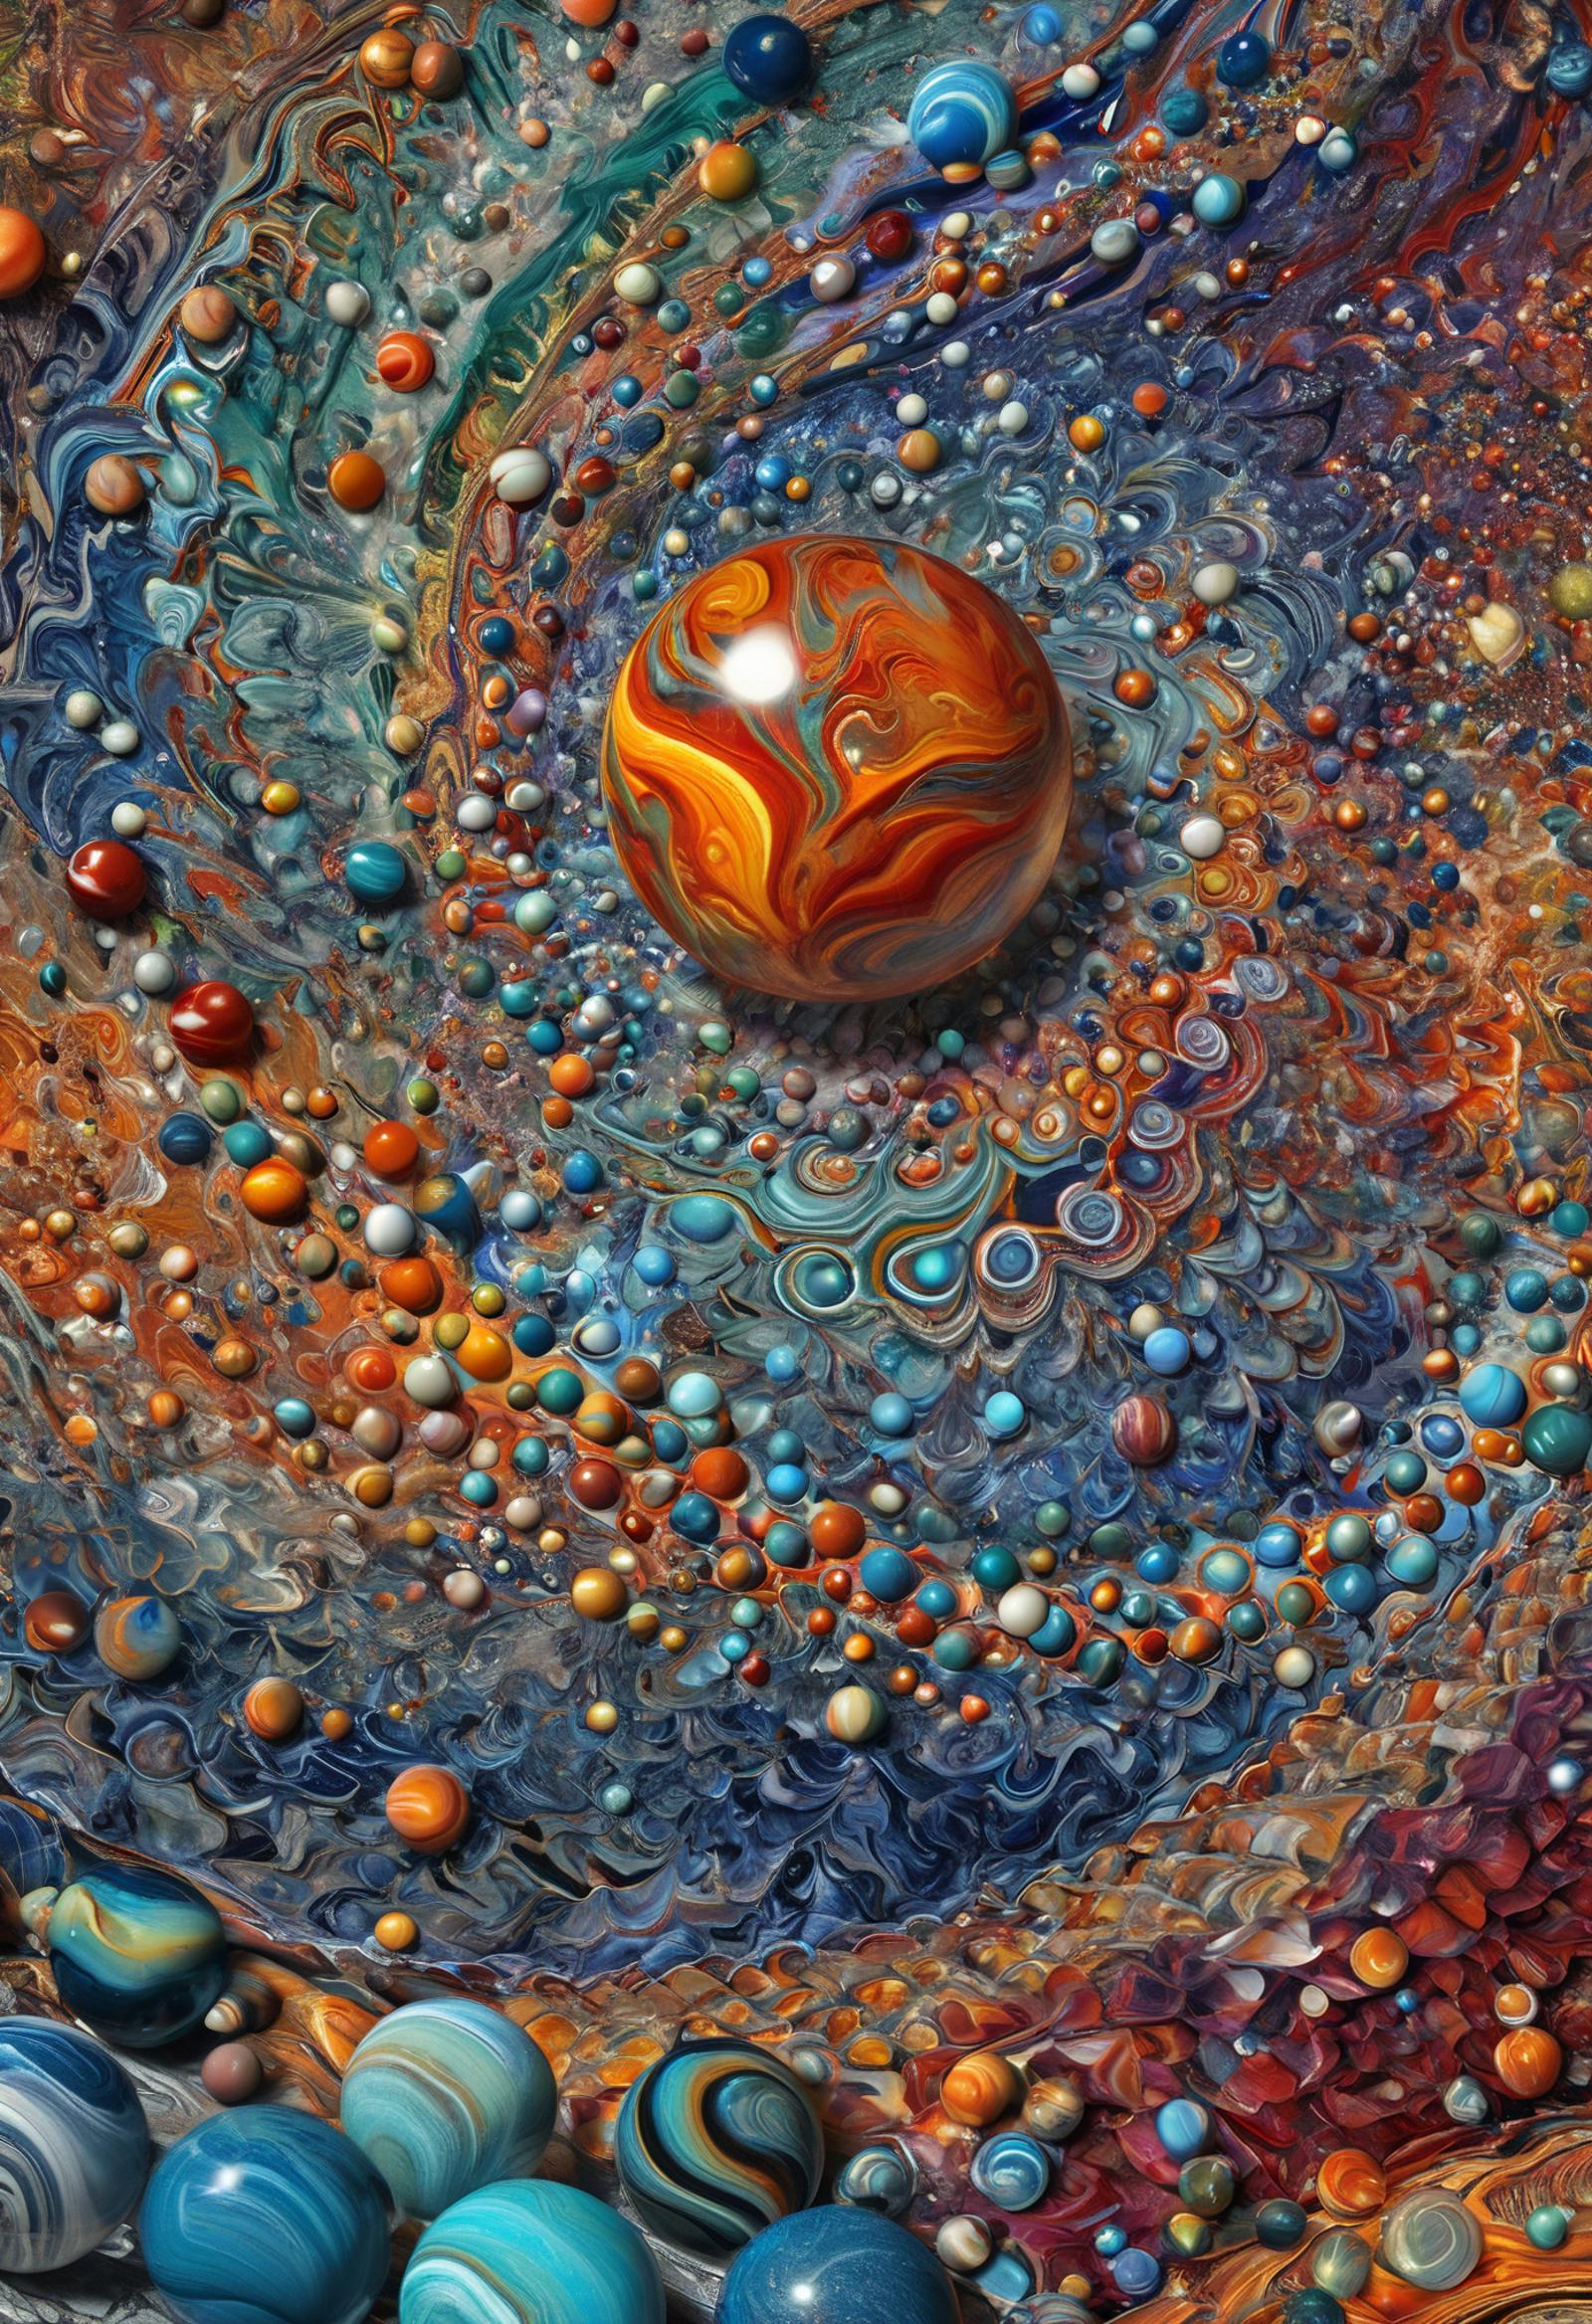 Colorful Abstract Art with a Large Orange, Yellow, and Red Ball in the Middle